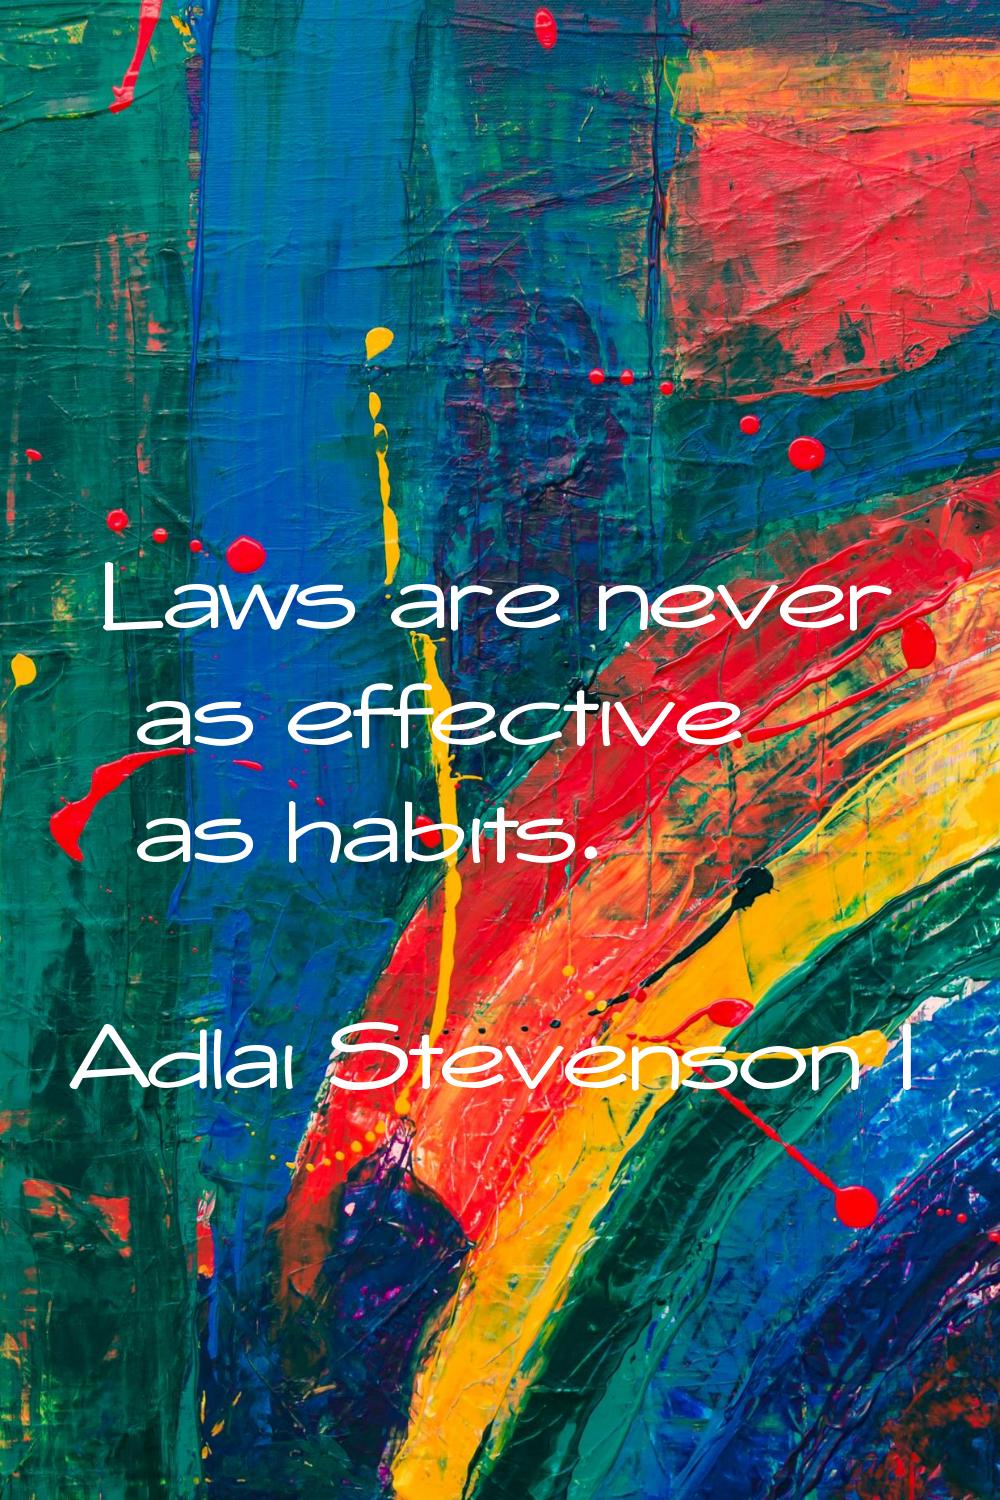 Laws are never as effective as habits.